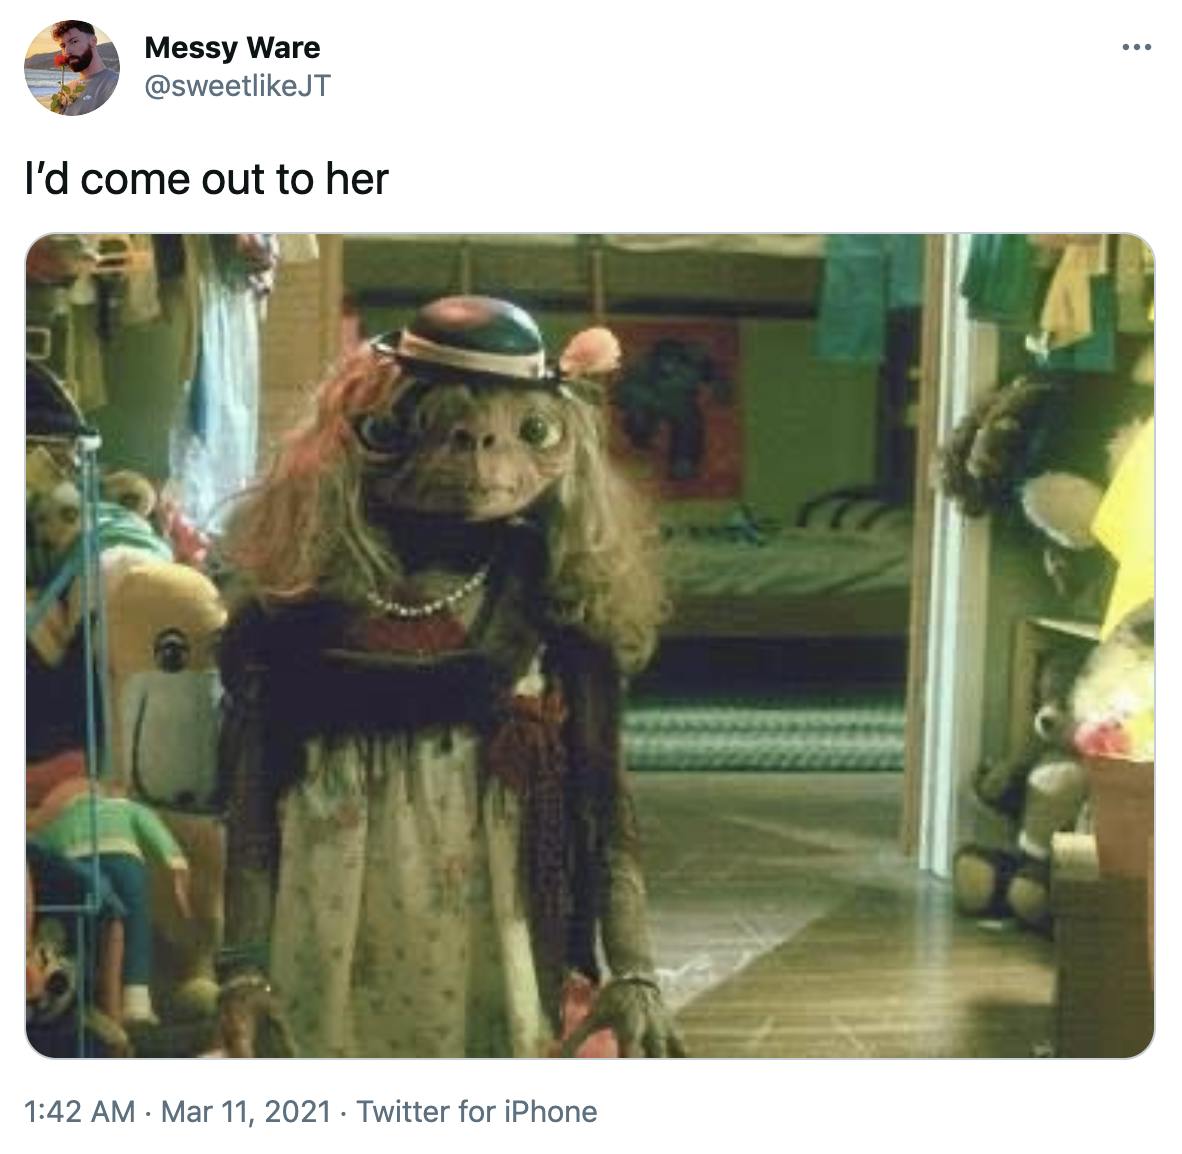 'I’d come out to her' Picture of ET wearing the little girl's clothing